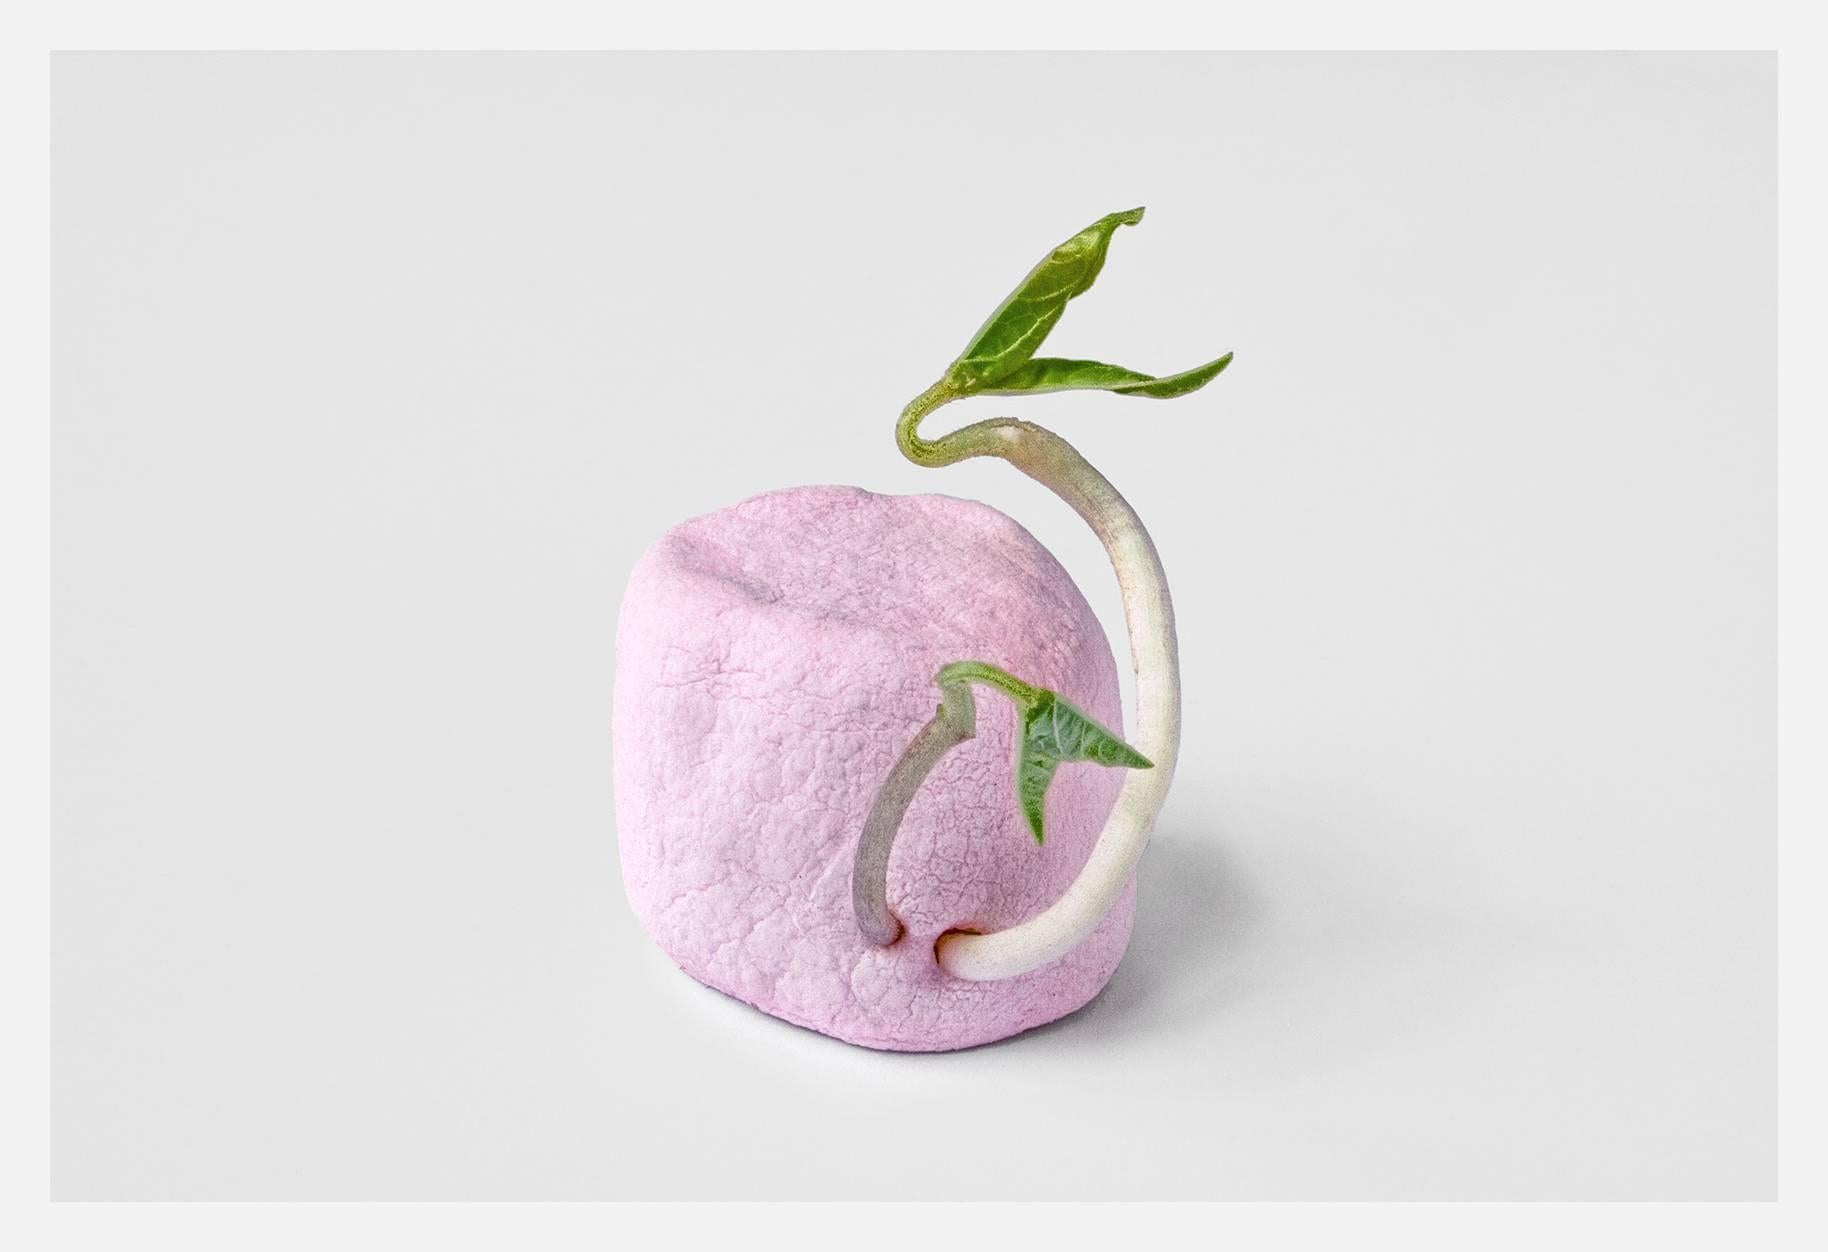 Photograph by Joachim Lapôtre, Seeds, 2007, France. Photo print on archival photo paper. 15 x 23 inches. Limited edition, signed.

Playfully juxtaposing a pink candy marshmallow with a burgeoning green sprout, this image evokes our modern romance